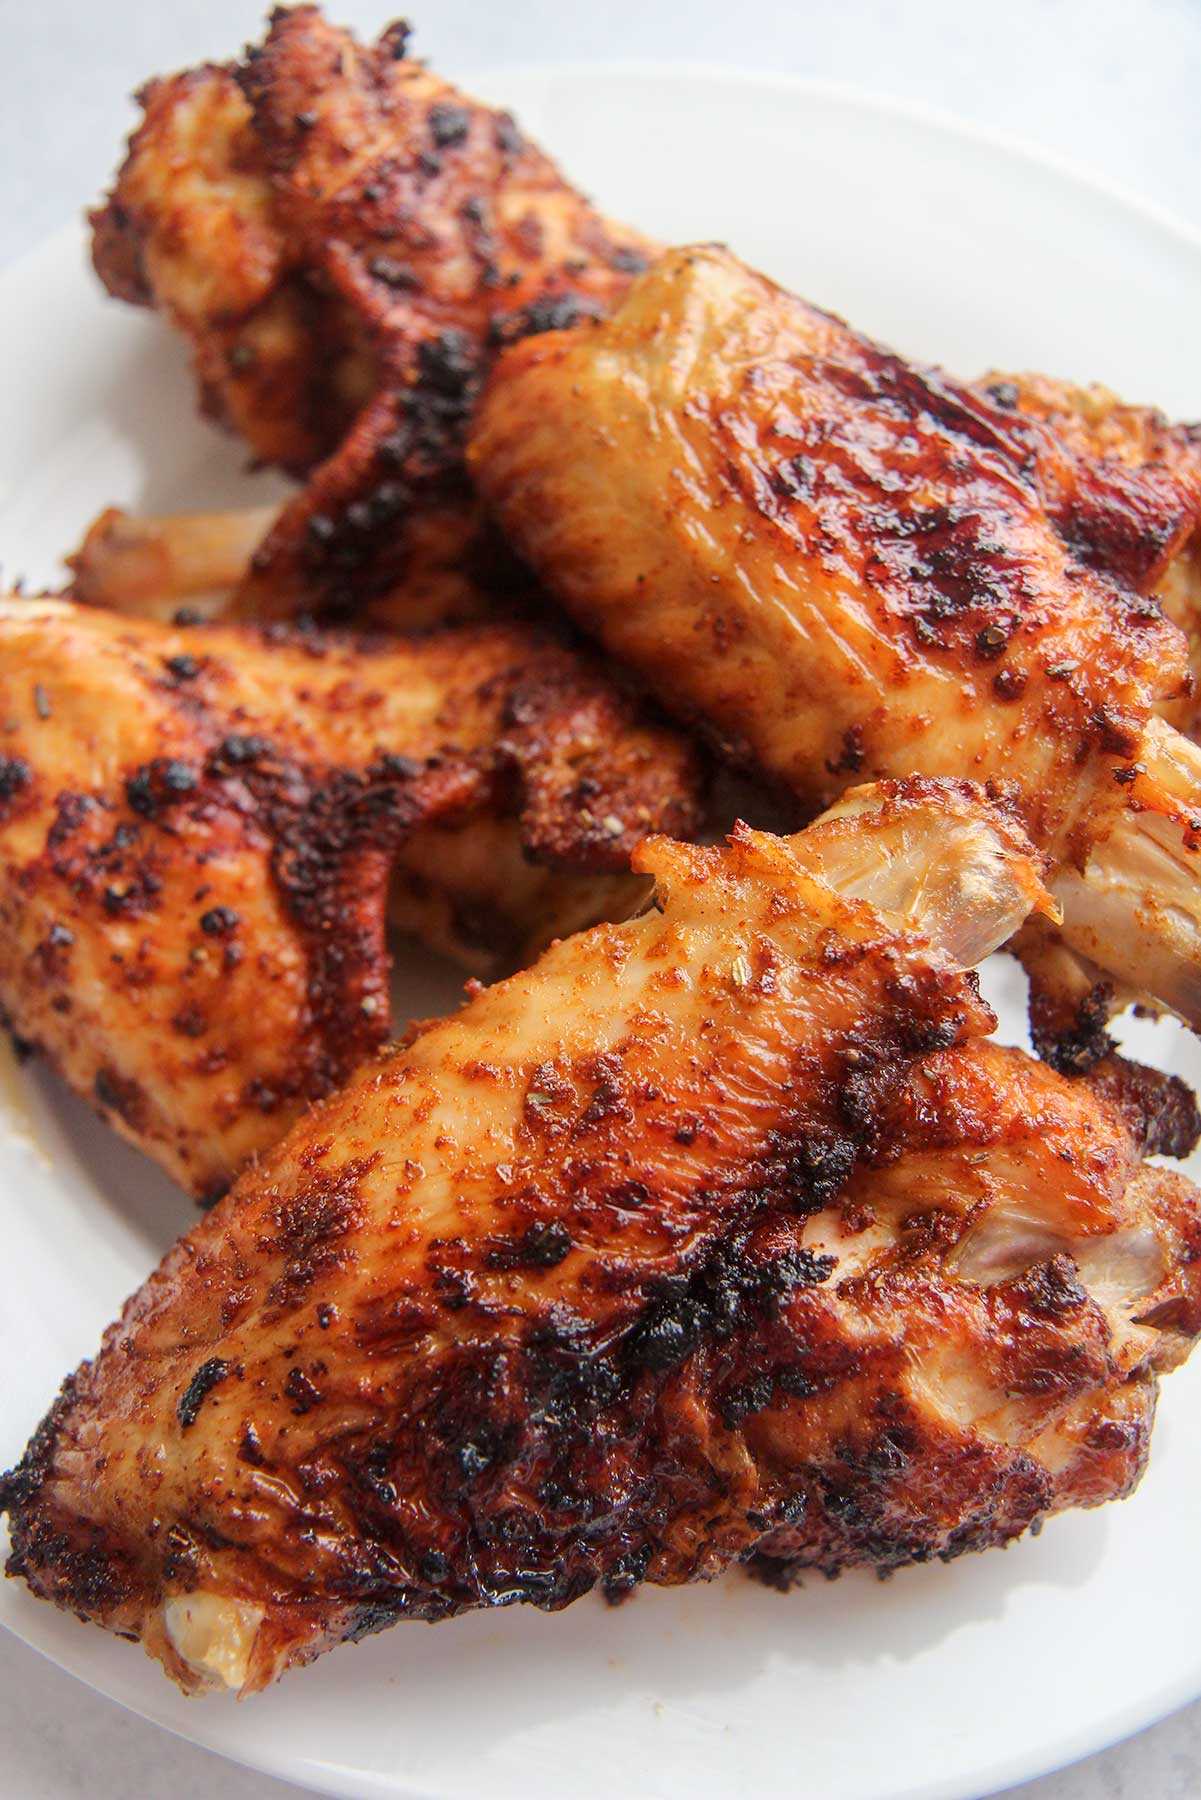 https://www.cookedbyjulie.com/wp-content/uploads/2021/05/air-fryer-turkey-wings-one.jpg